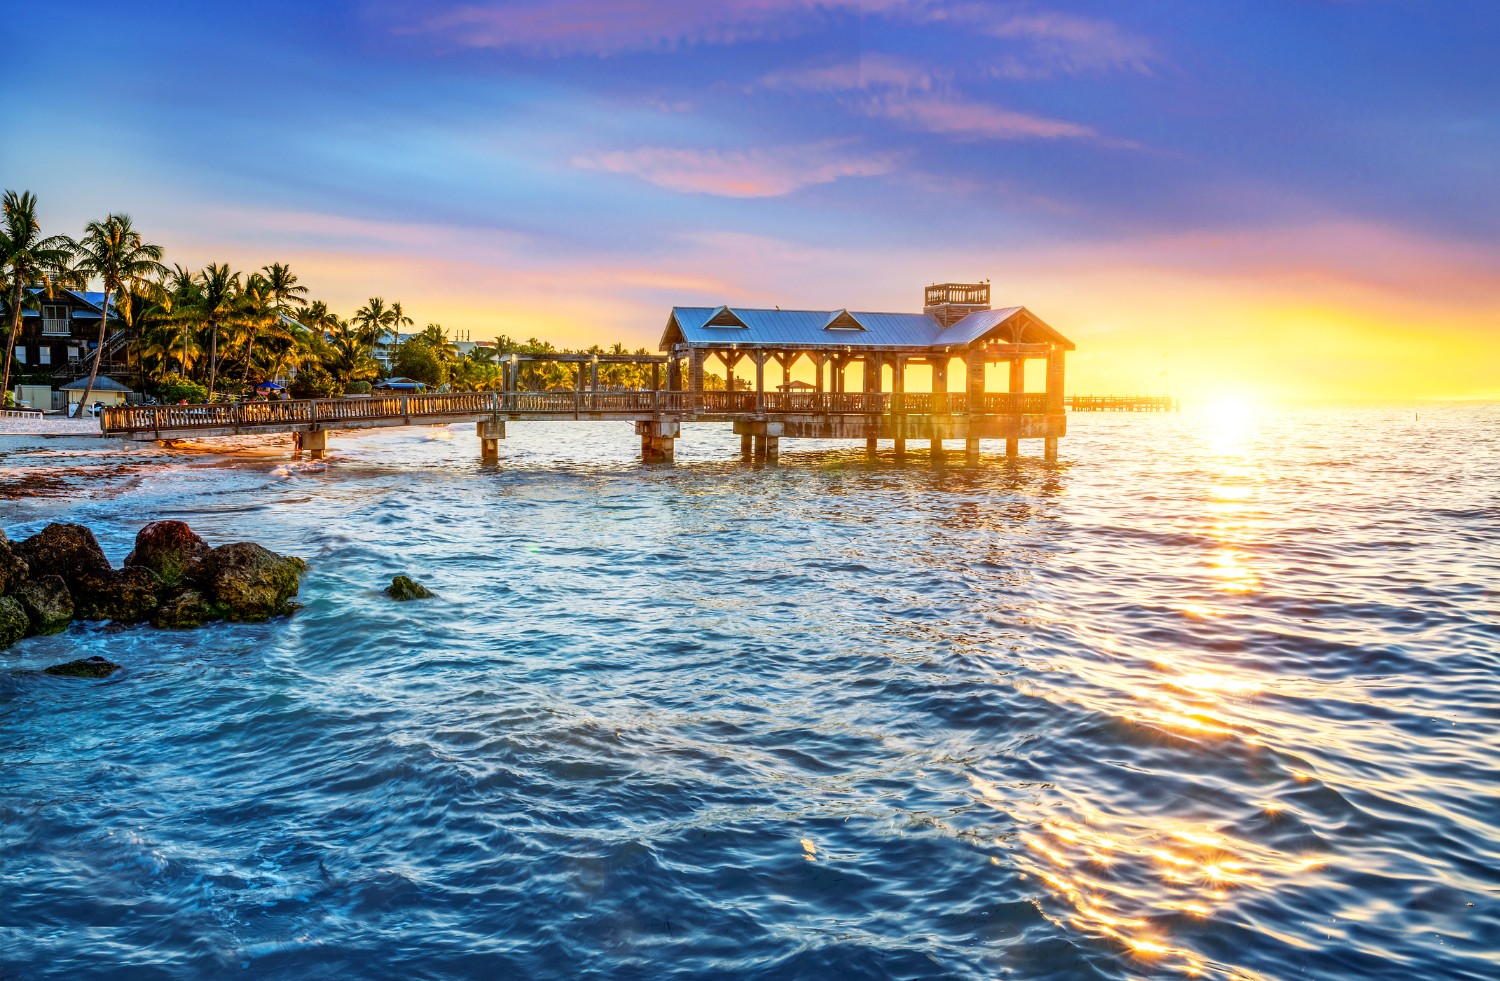 Pier at the beach in Key West, Florida USA